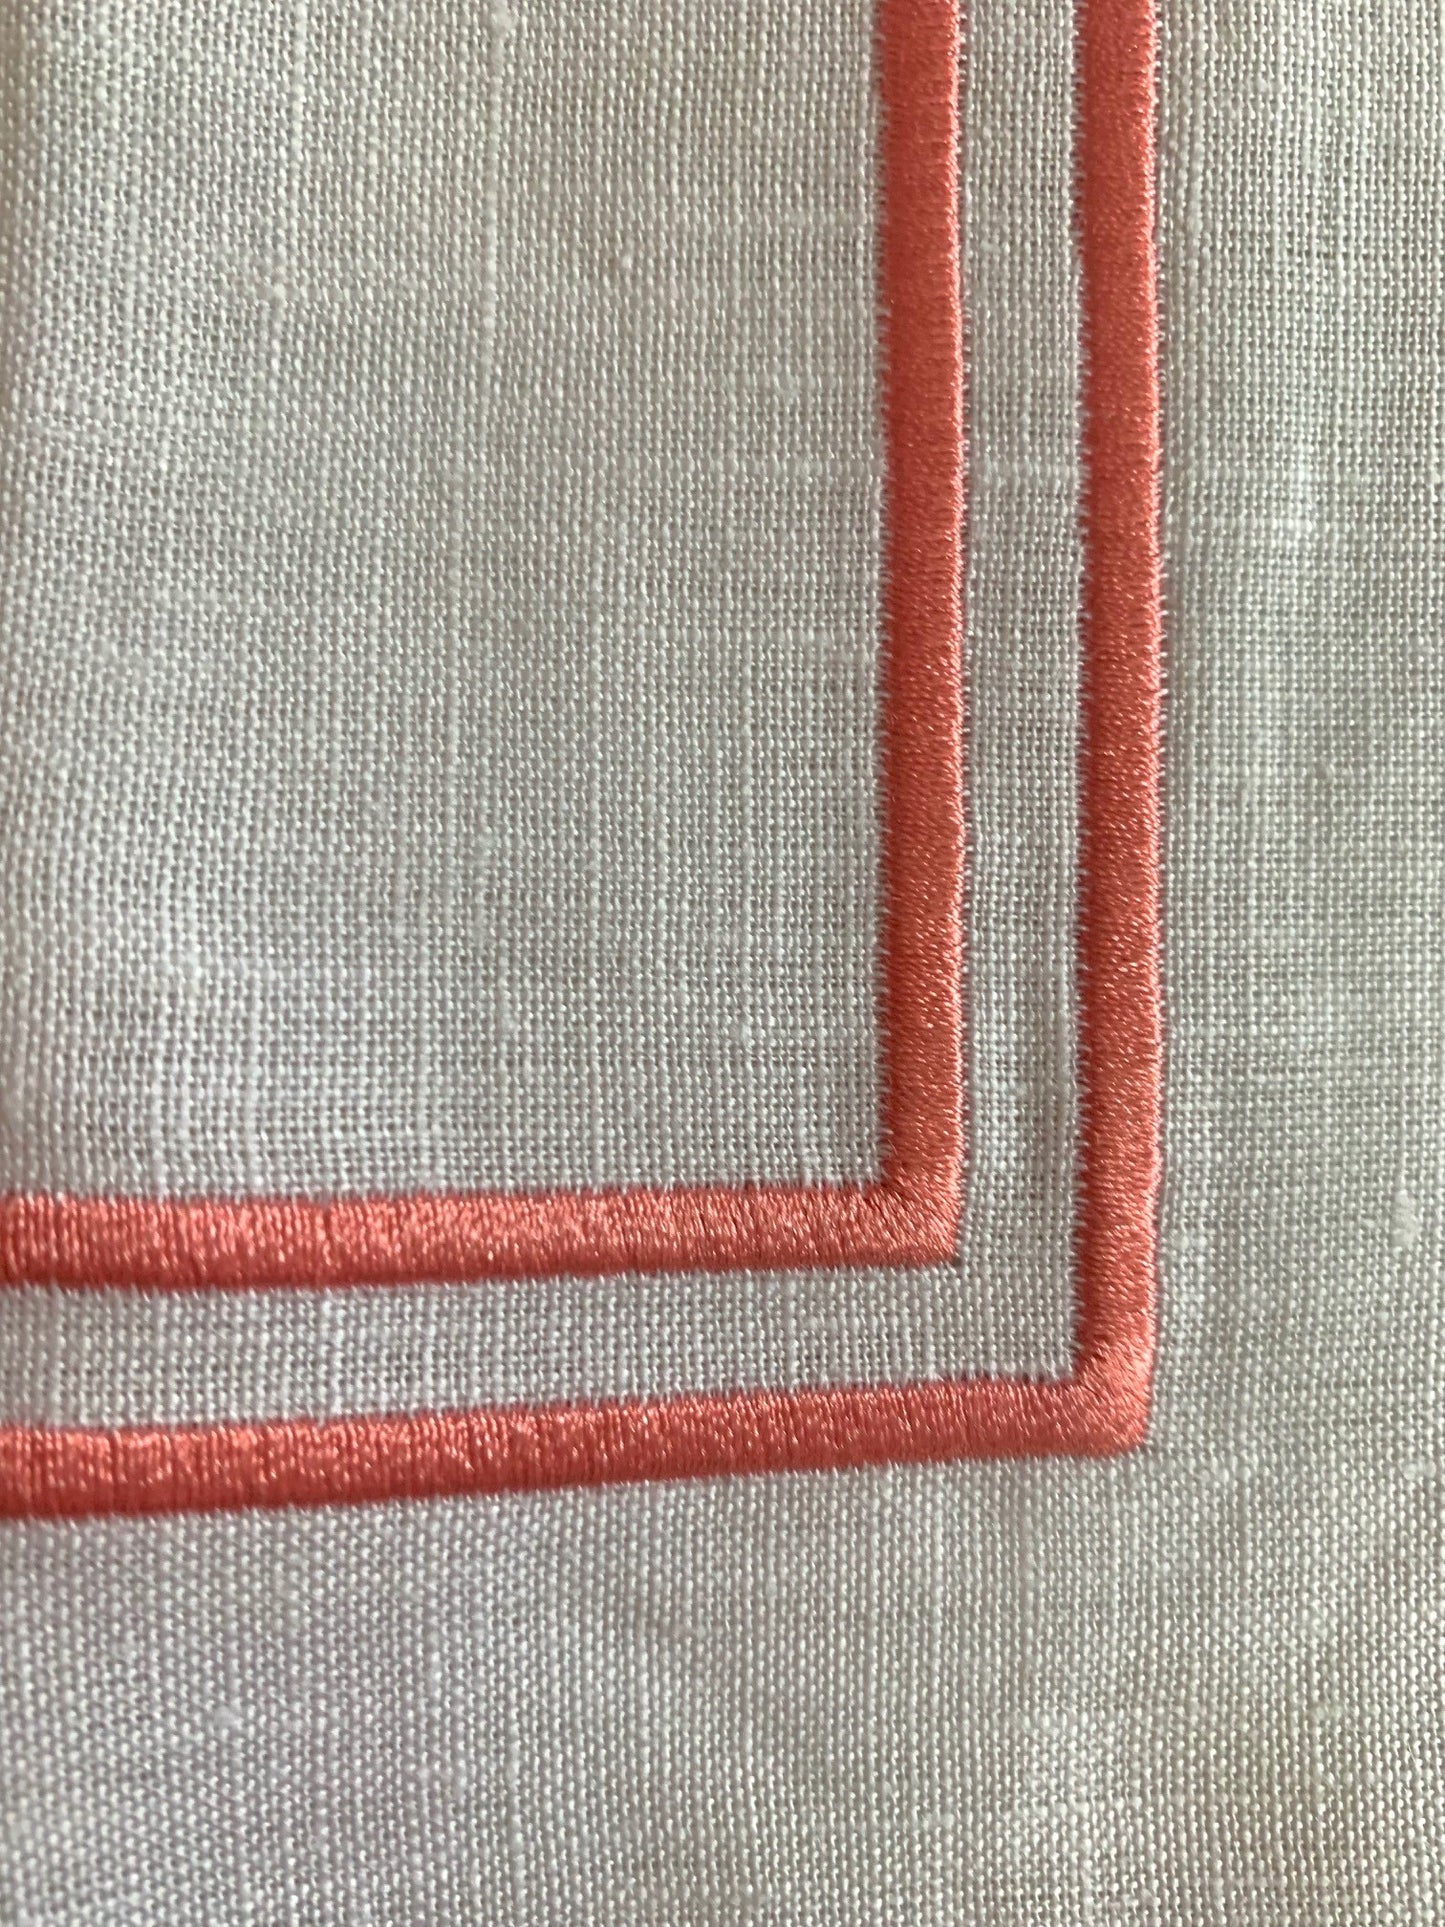 double edged piping in coral on white linen